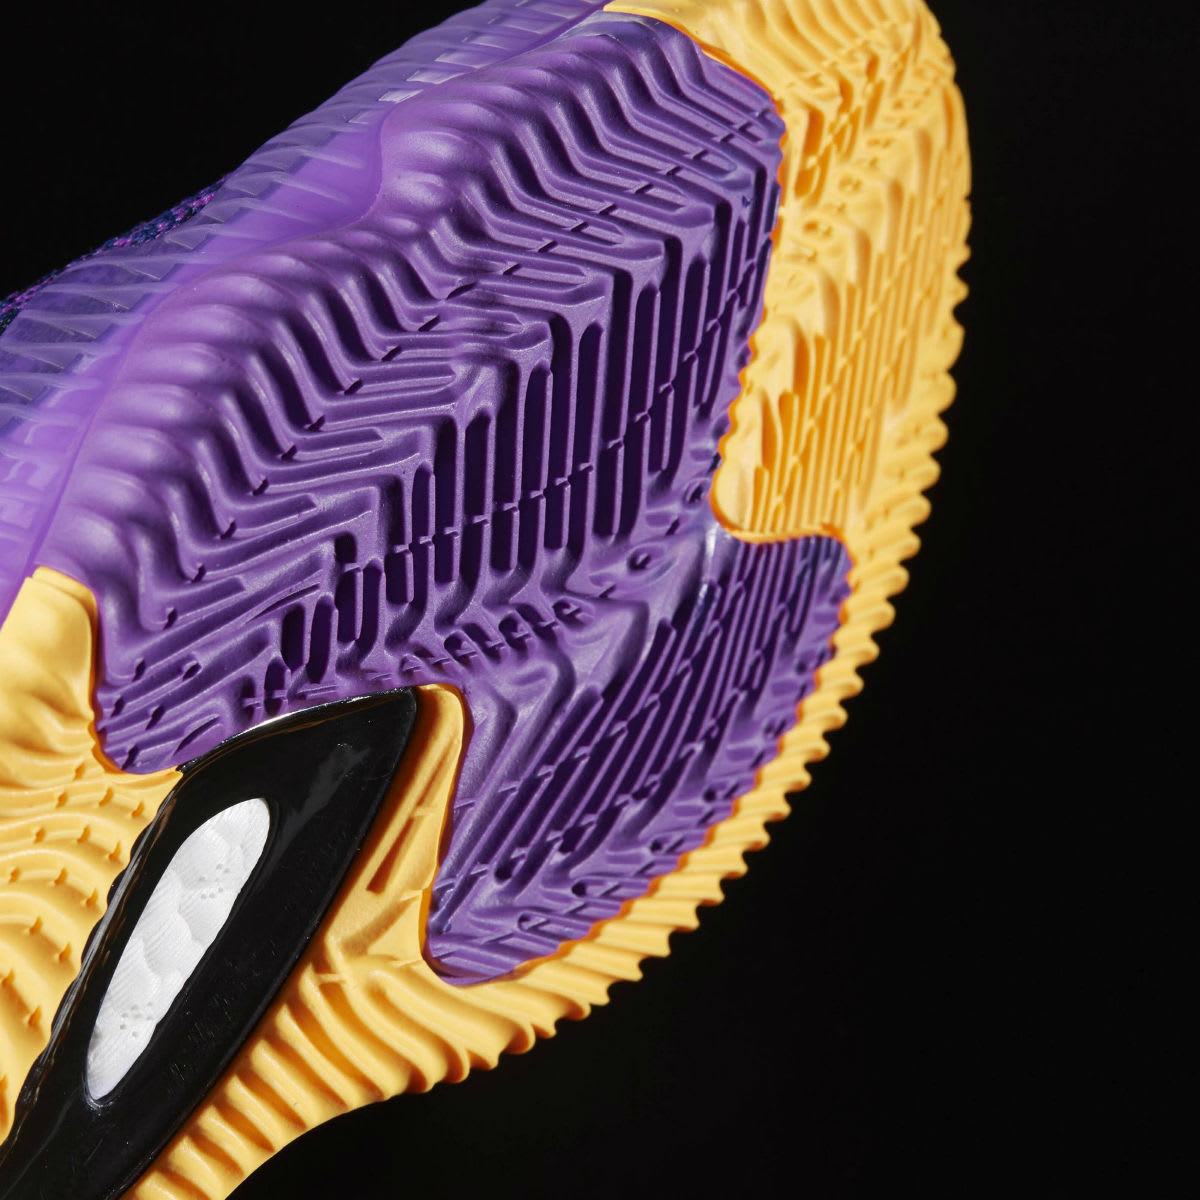 Adidas Crazylight Boost Swaggy P Lakers Outsole BB8175